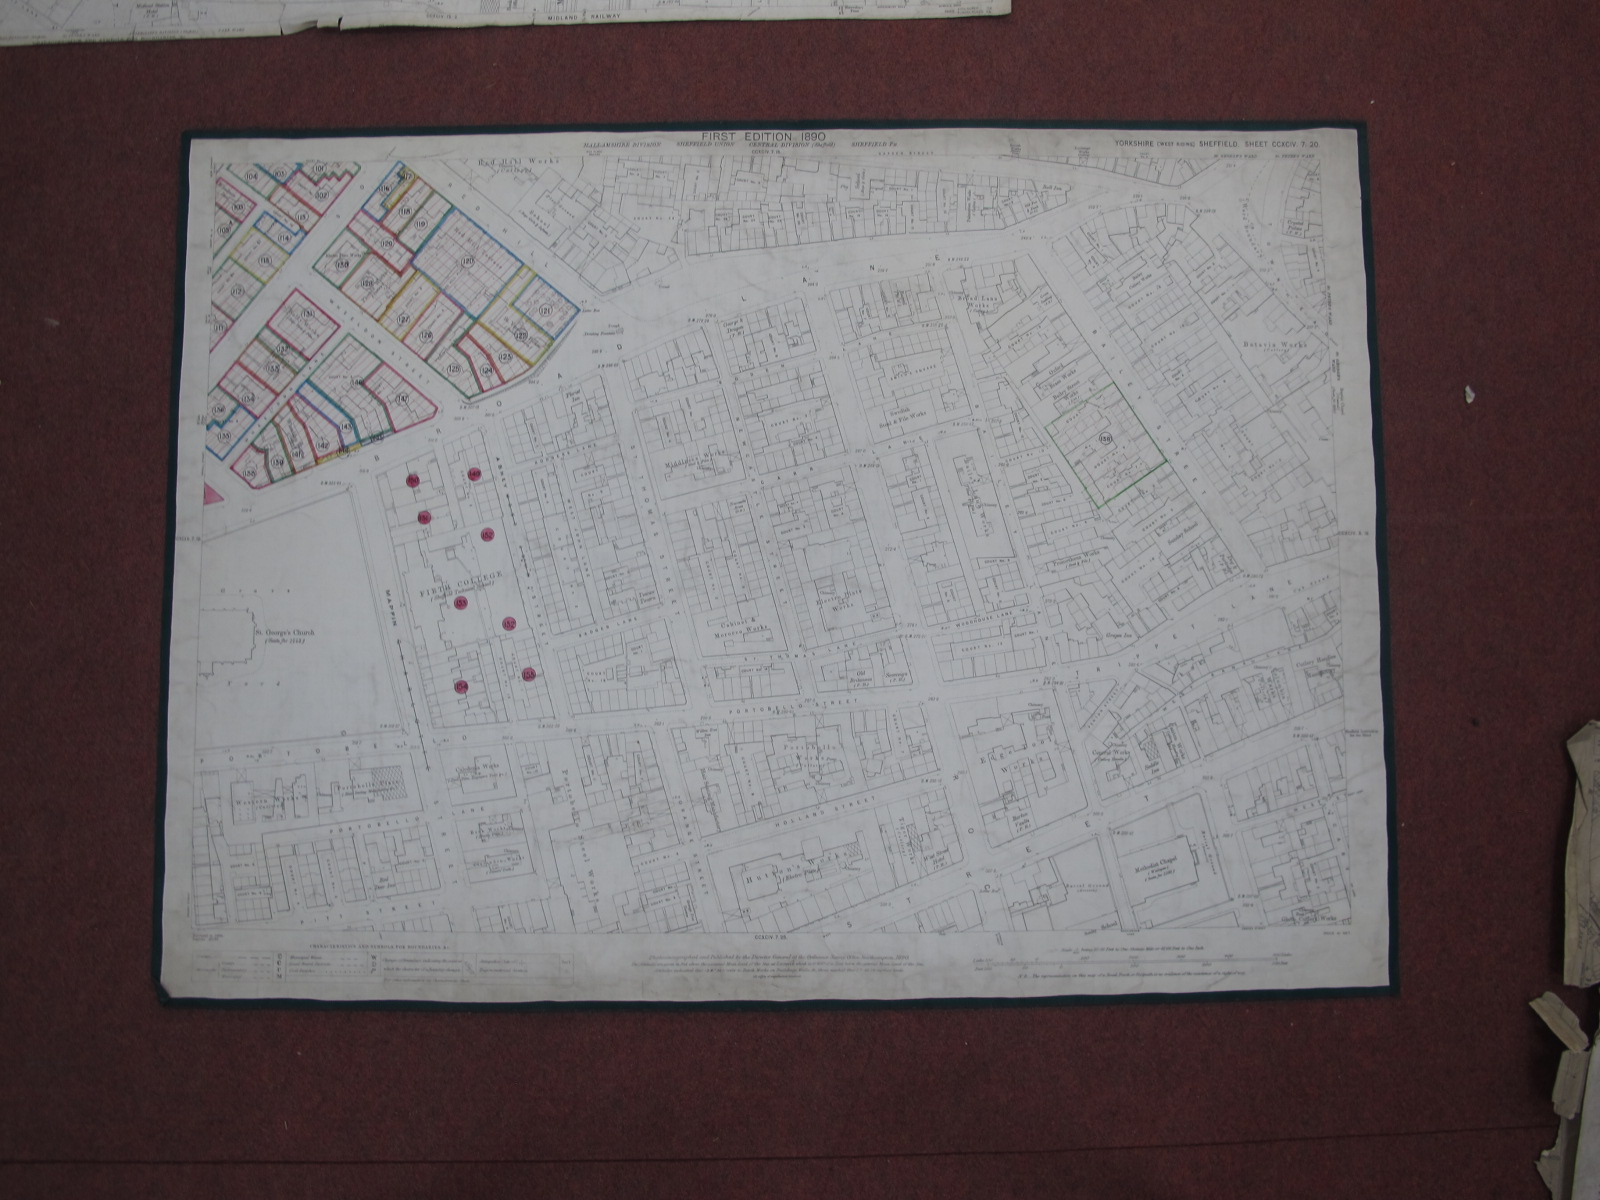 Sheffield Central Maps, Attercliffe - Darnall - some dates noted, 1890, 1903, 1967, various - Image 8 of 10